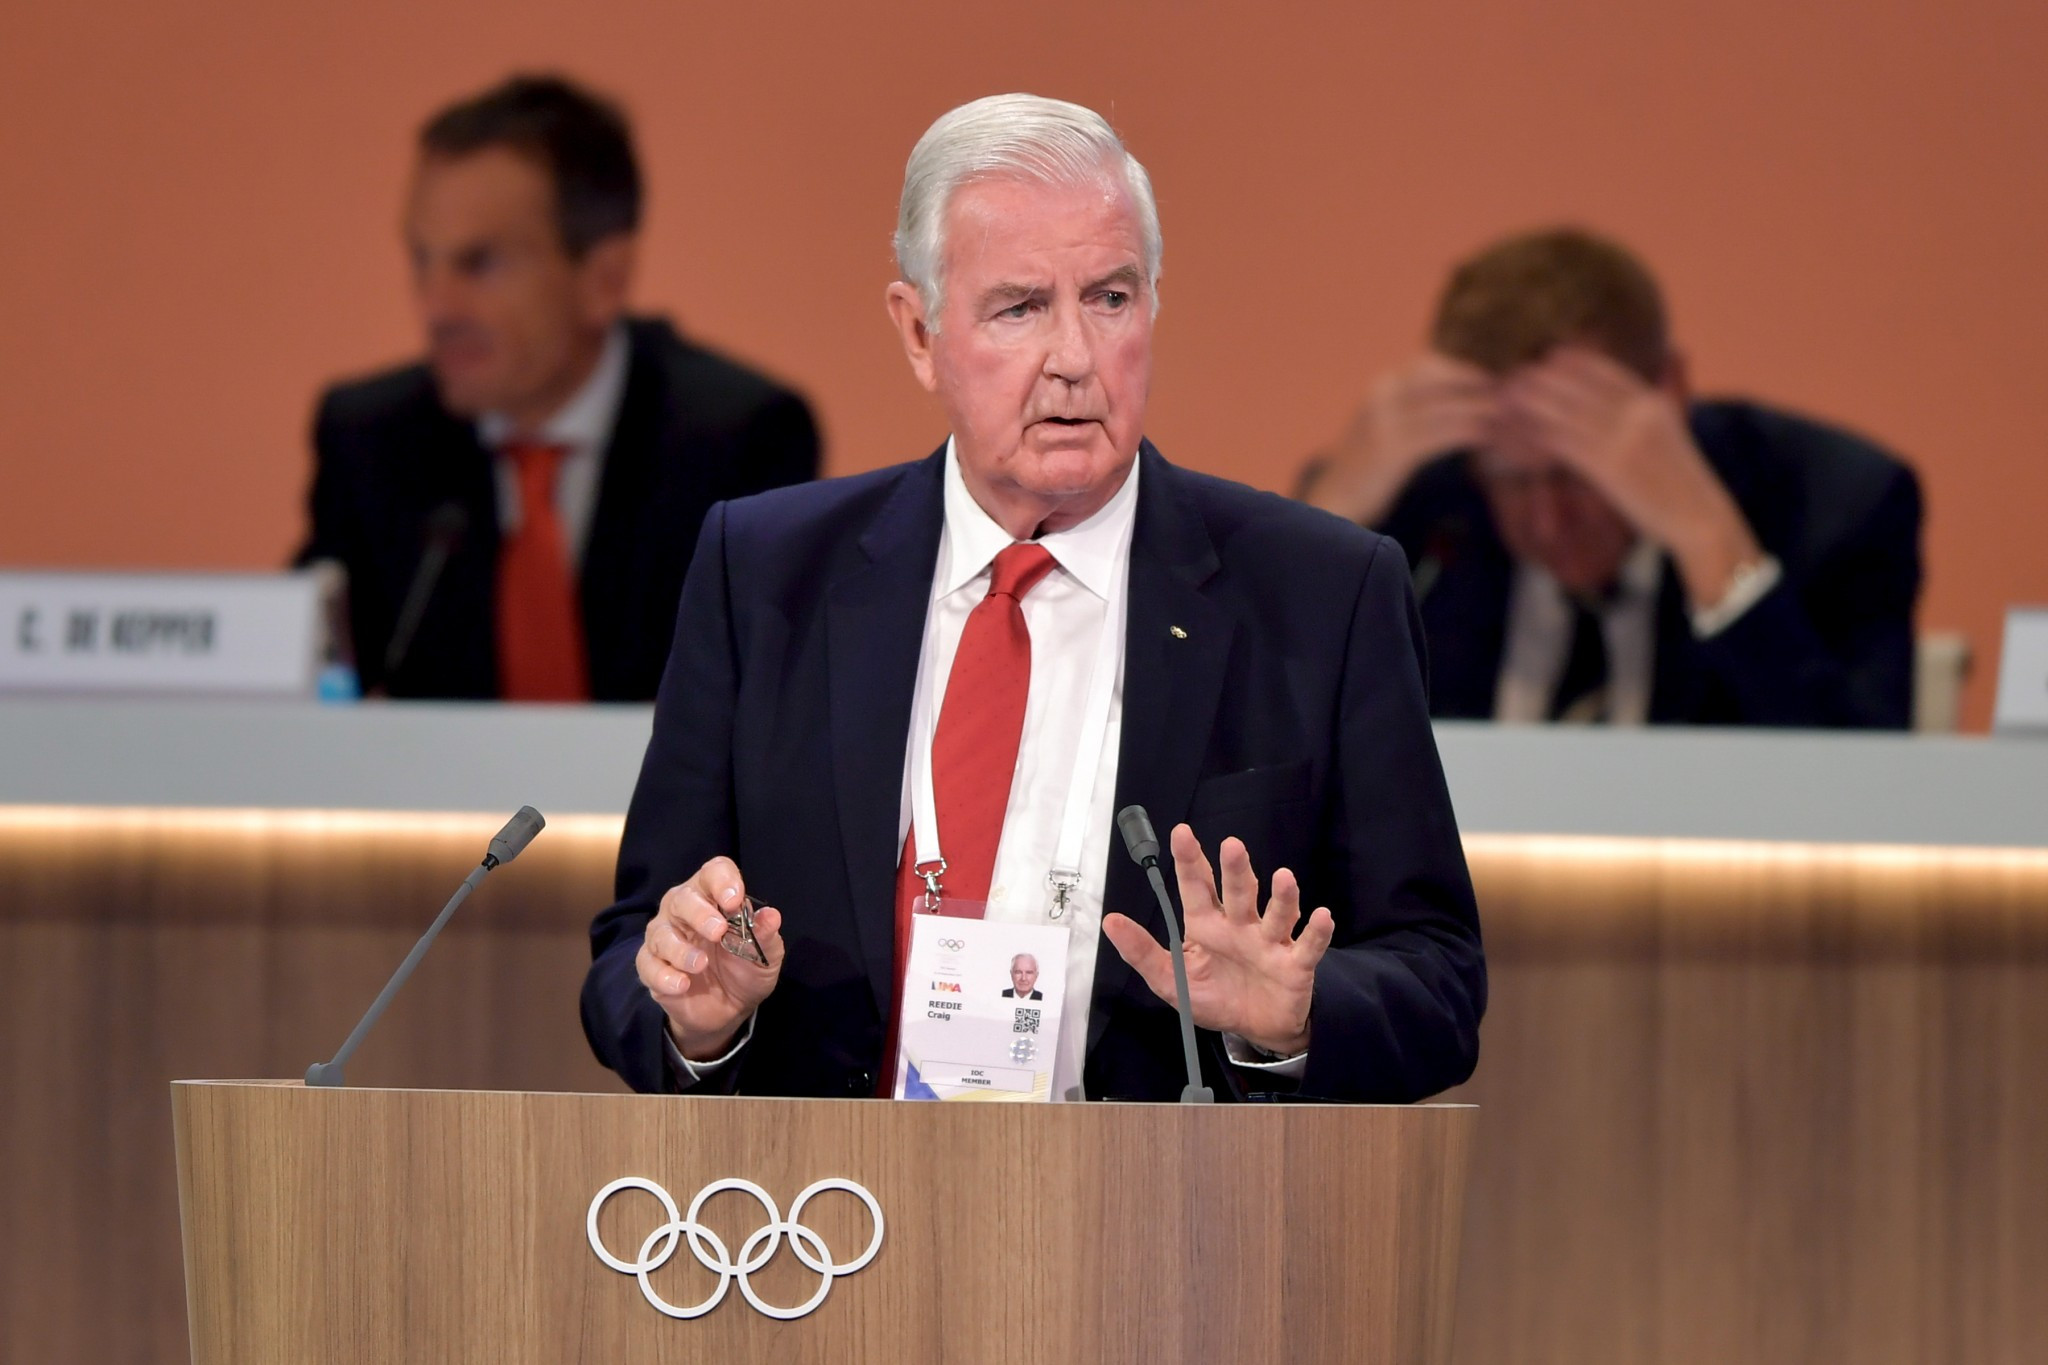 Sir Craig Reedie provided an update on the work of the World Anti-Doping Agency ©Getty Images